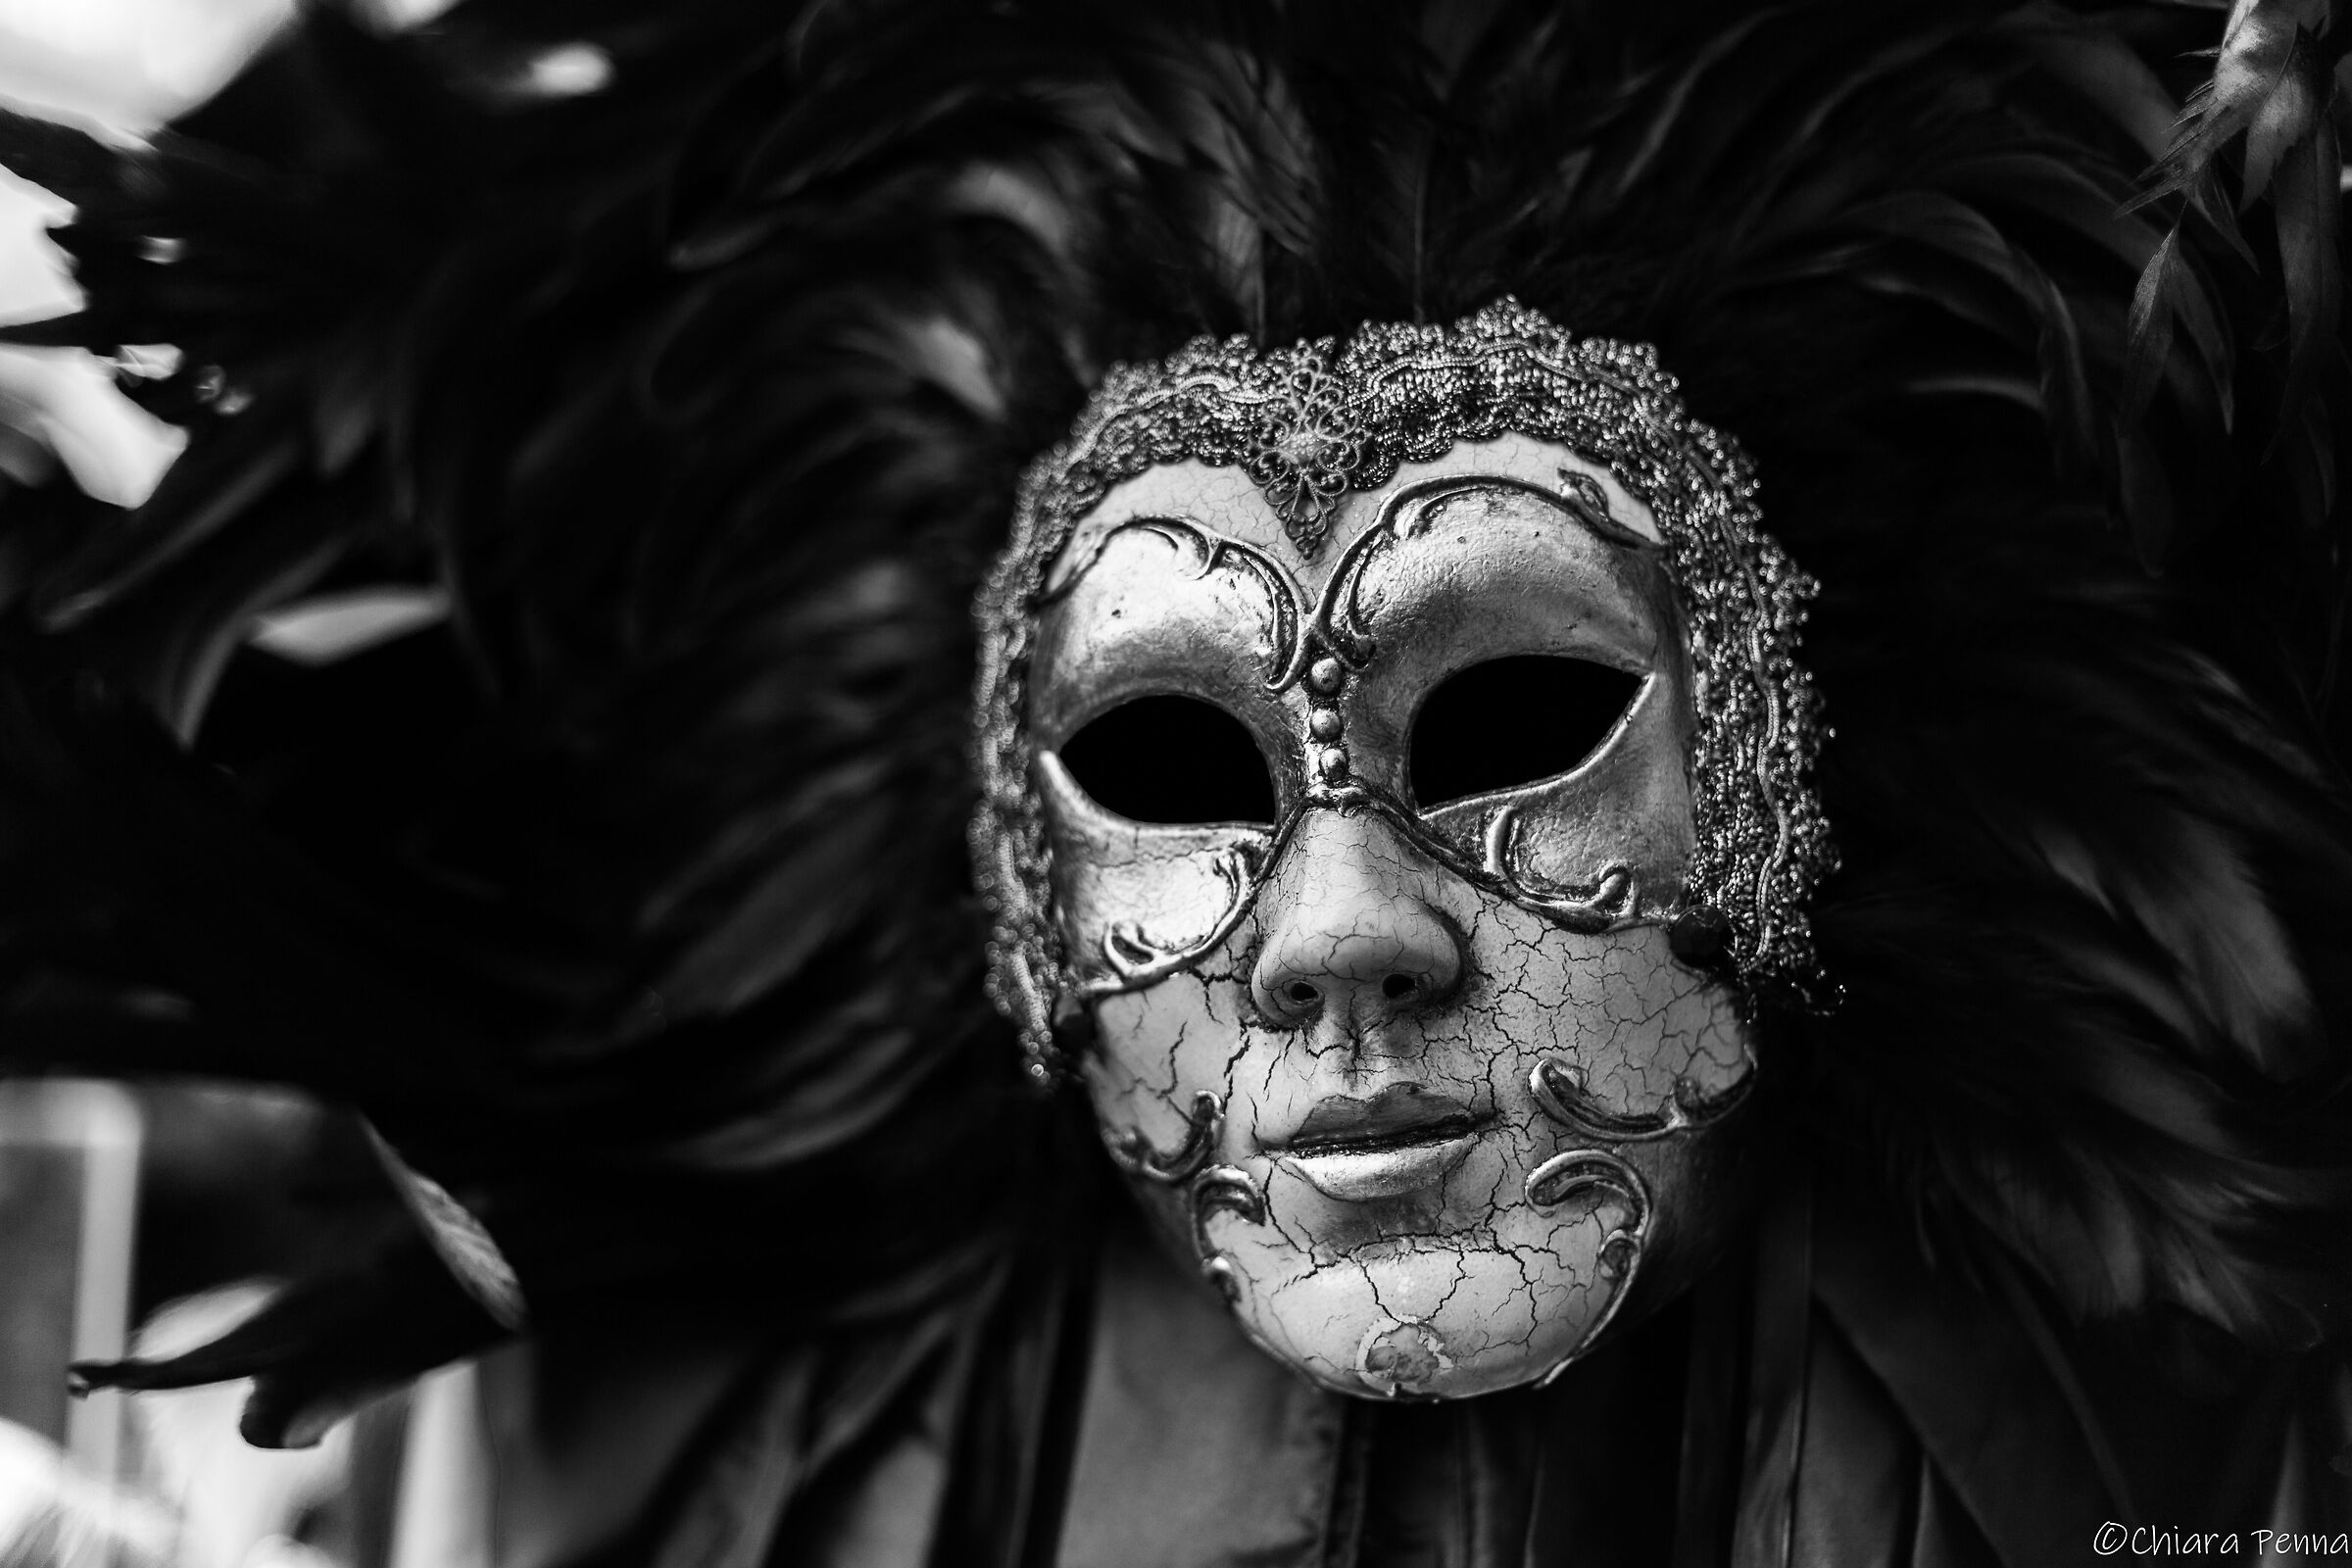 Venice and its masks...